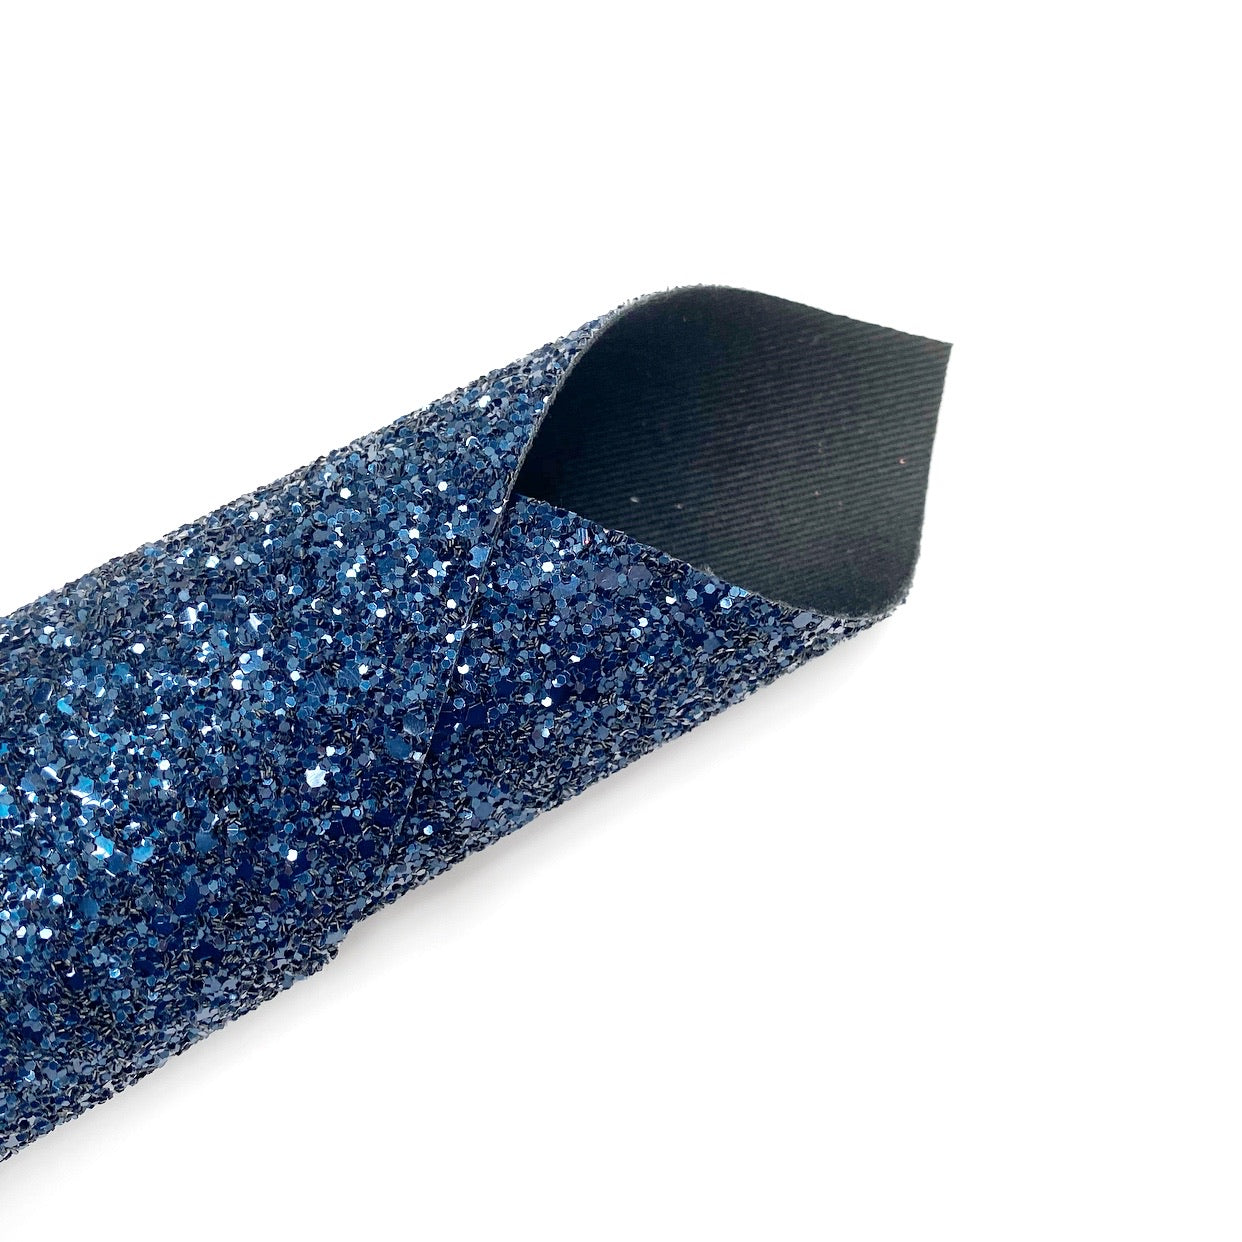 It’s all Navy Lux Premium Chunky Glitter Fabric